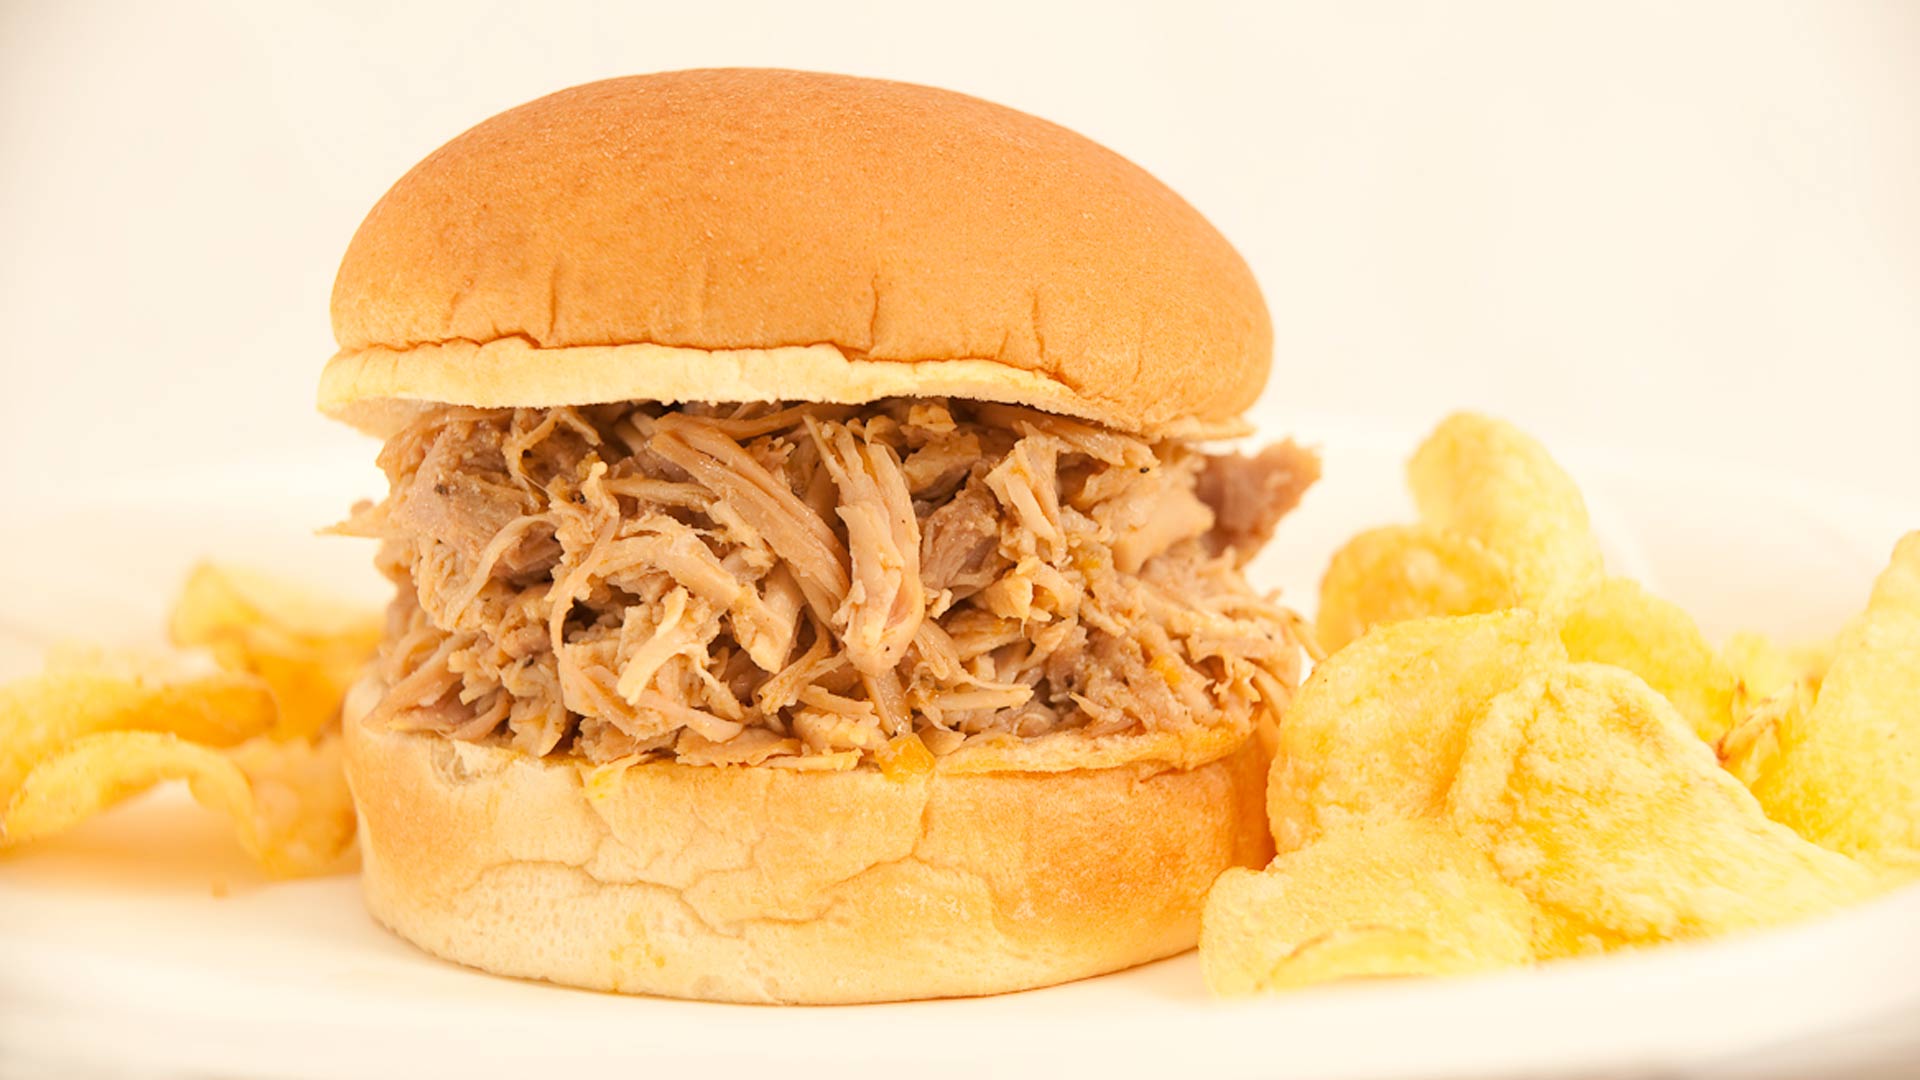 sandwich filled with pulled turkey won a plate with potato chips